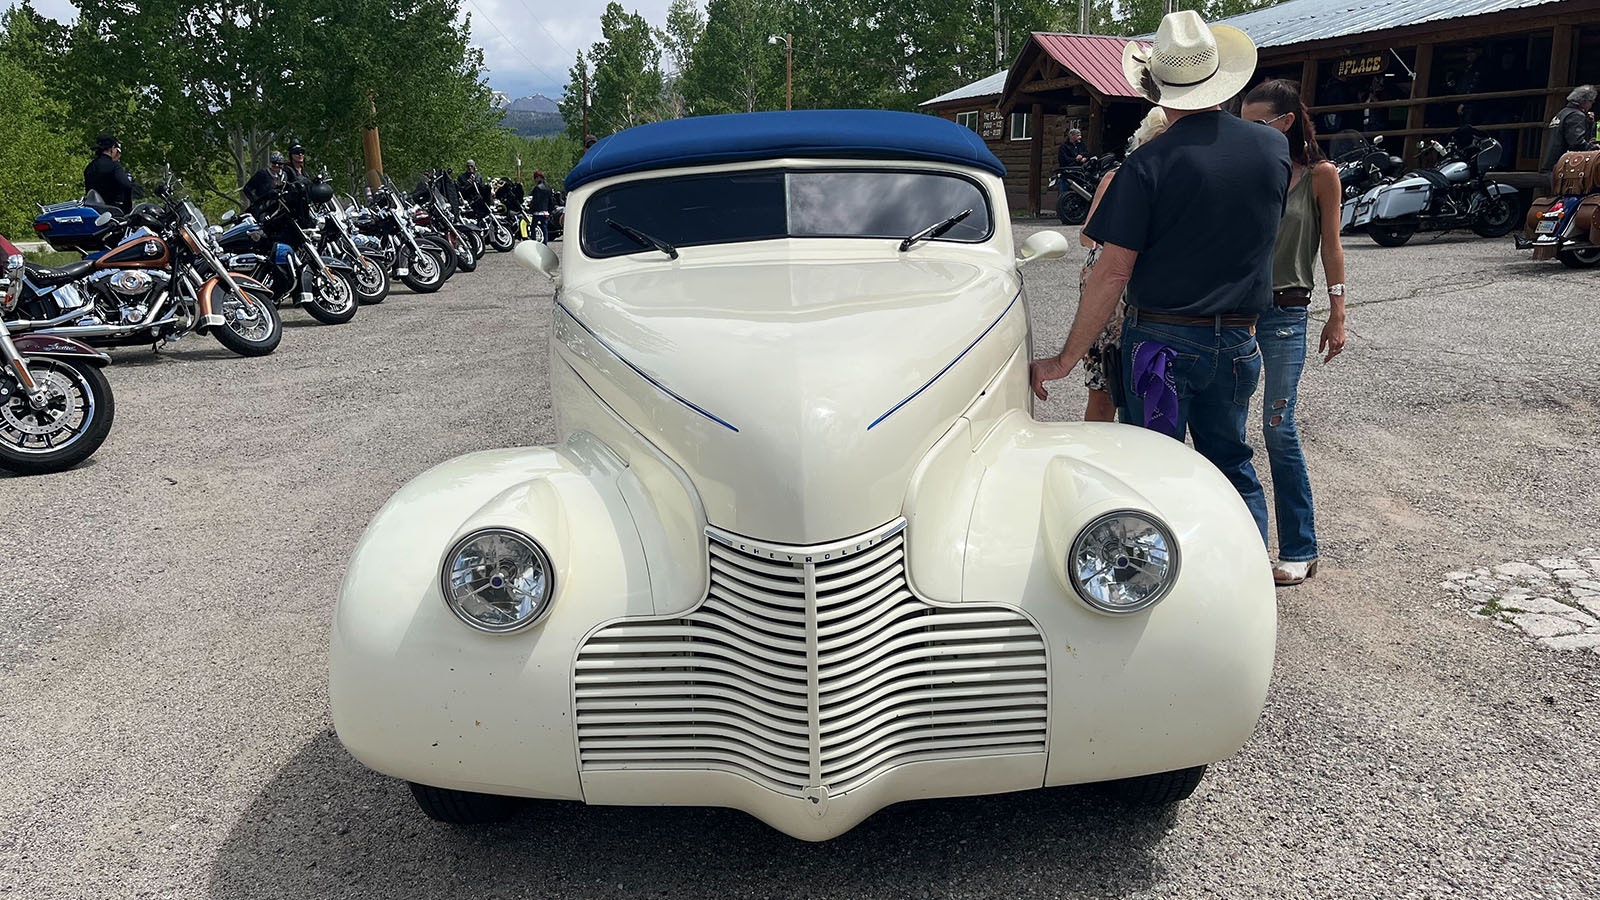 Along with the bikes, Boulder resident Jeff Bittman drove his 1940 Chevy Cabriolet "Vanilla Shake" in the poker run.